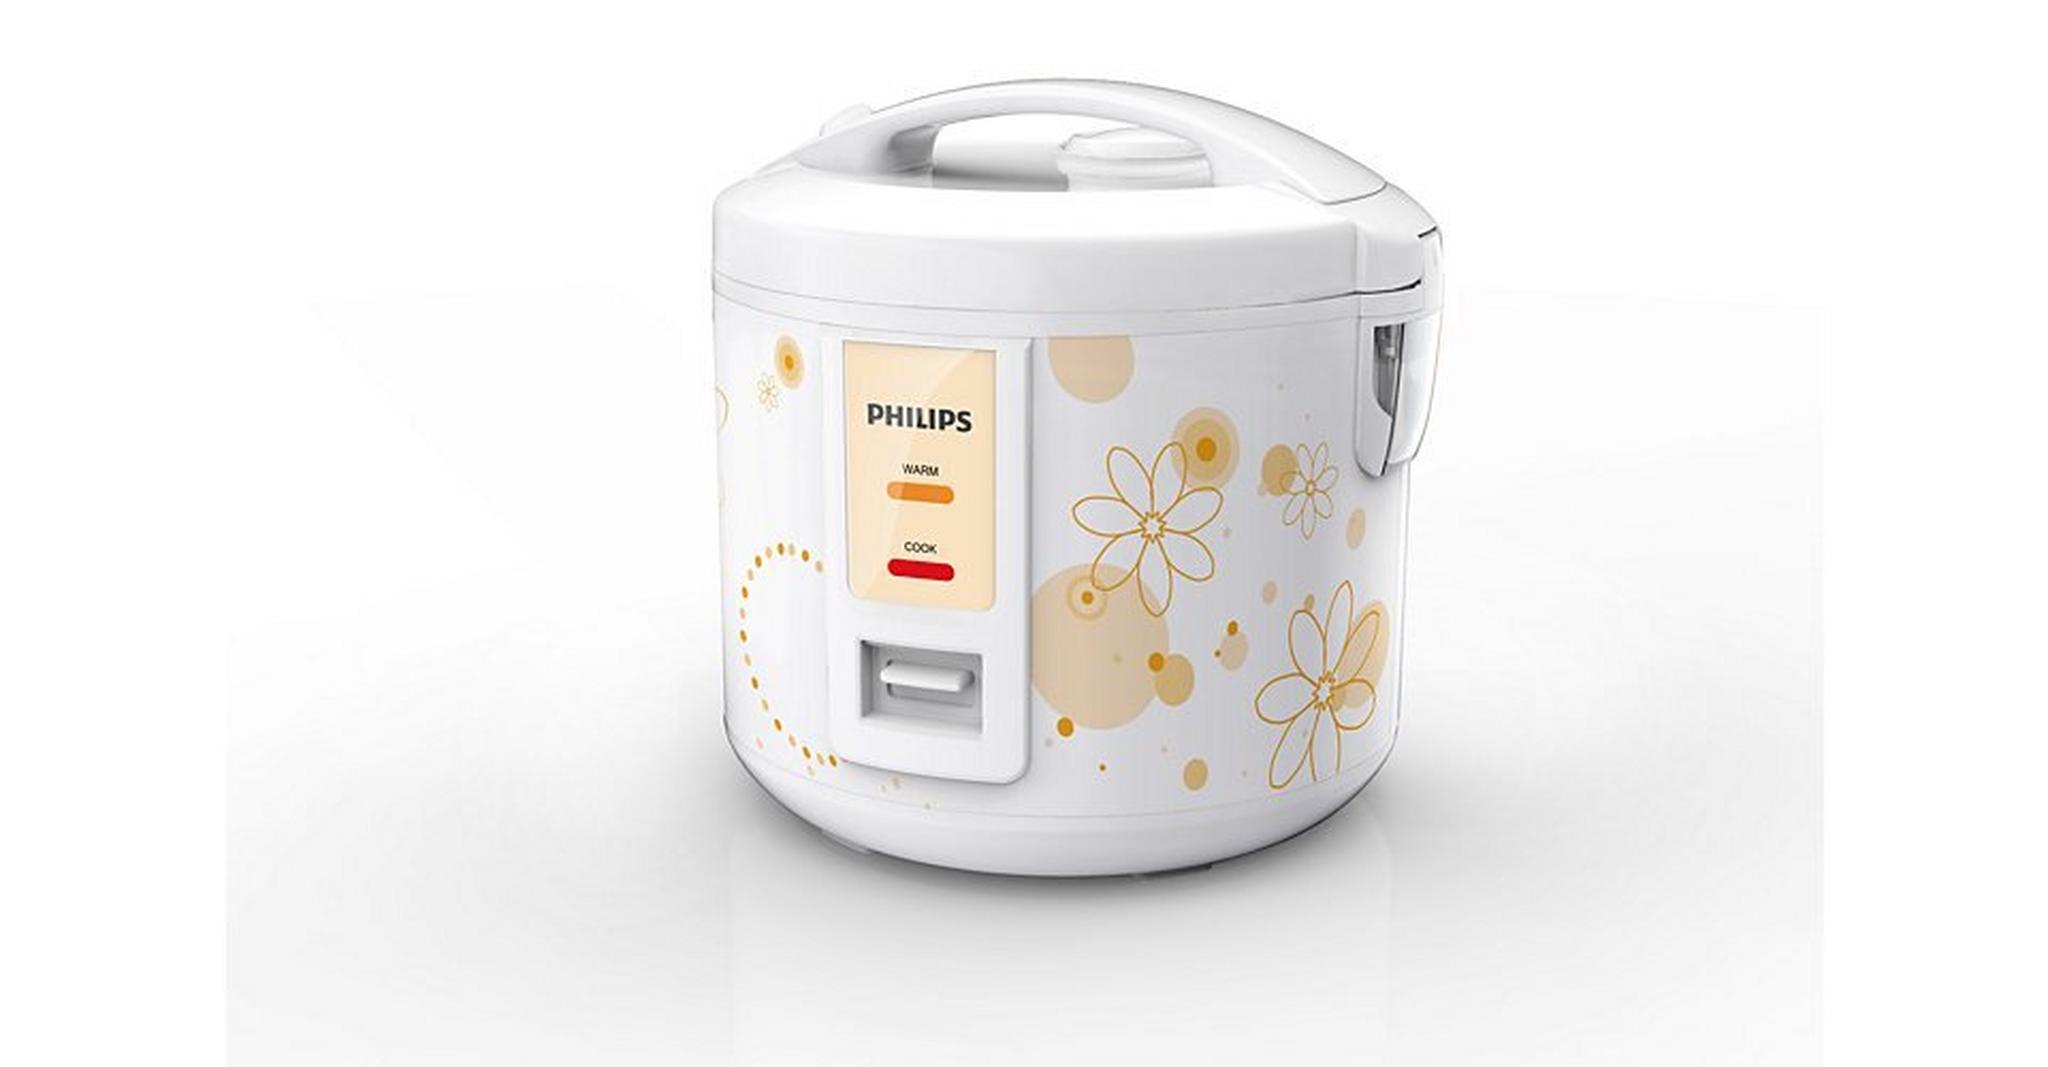 Philips Rice Cooker 650W 1.8Litres - HD3017/55